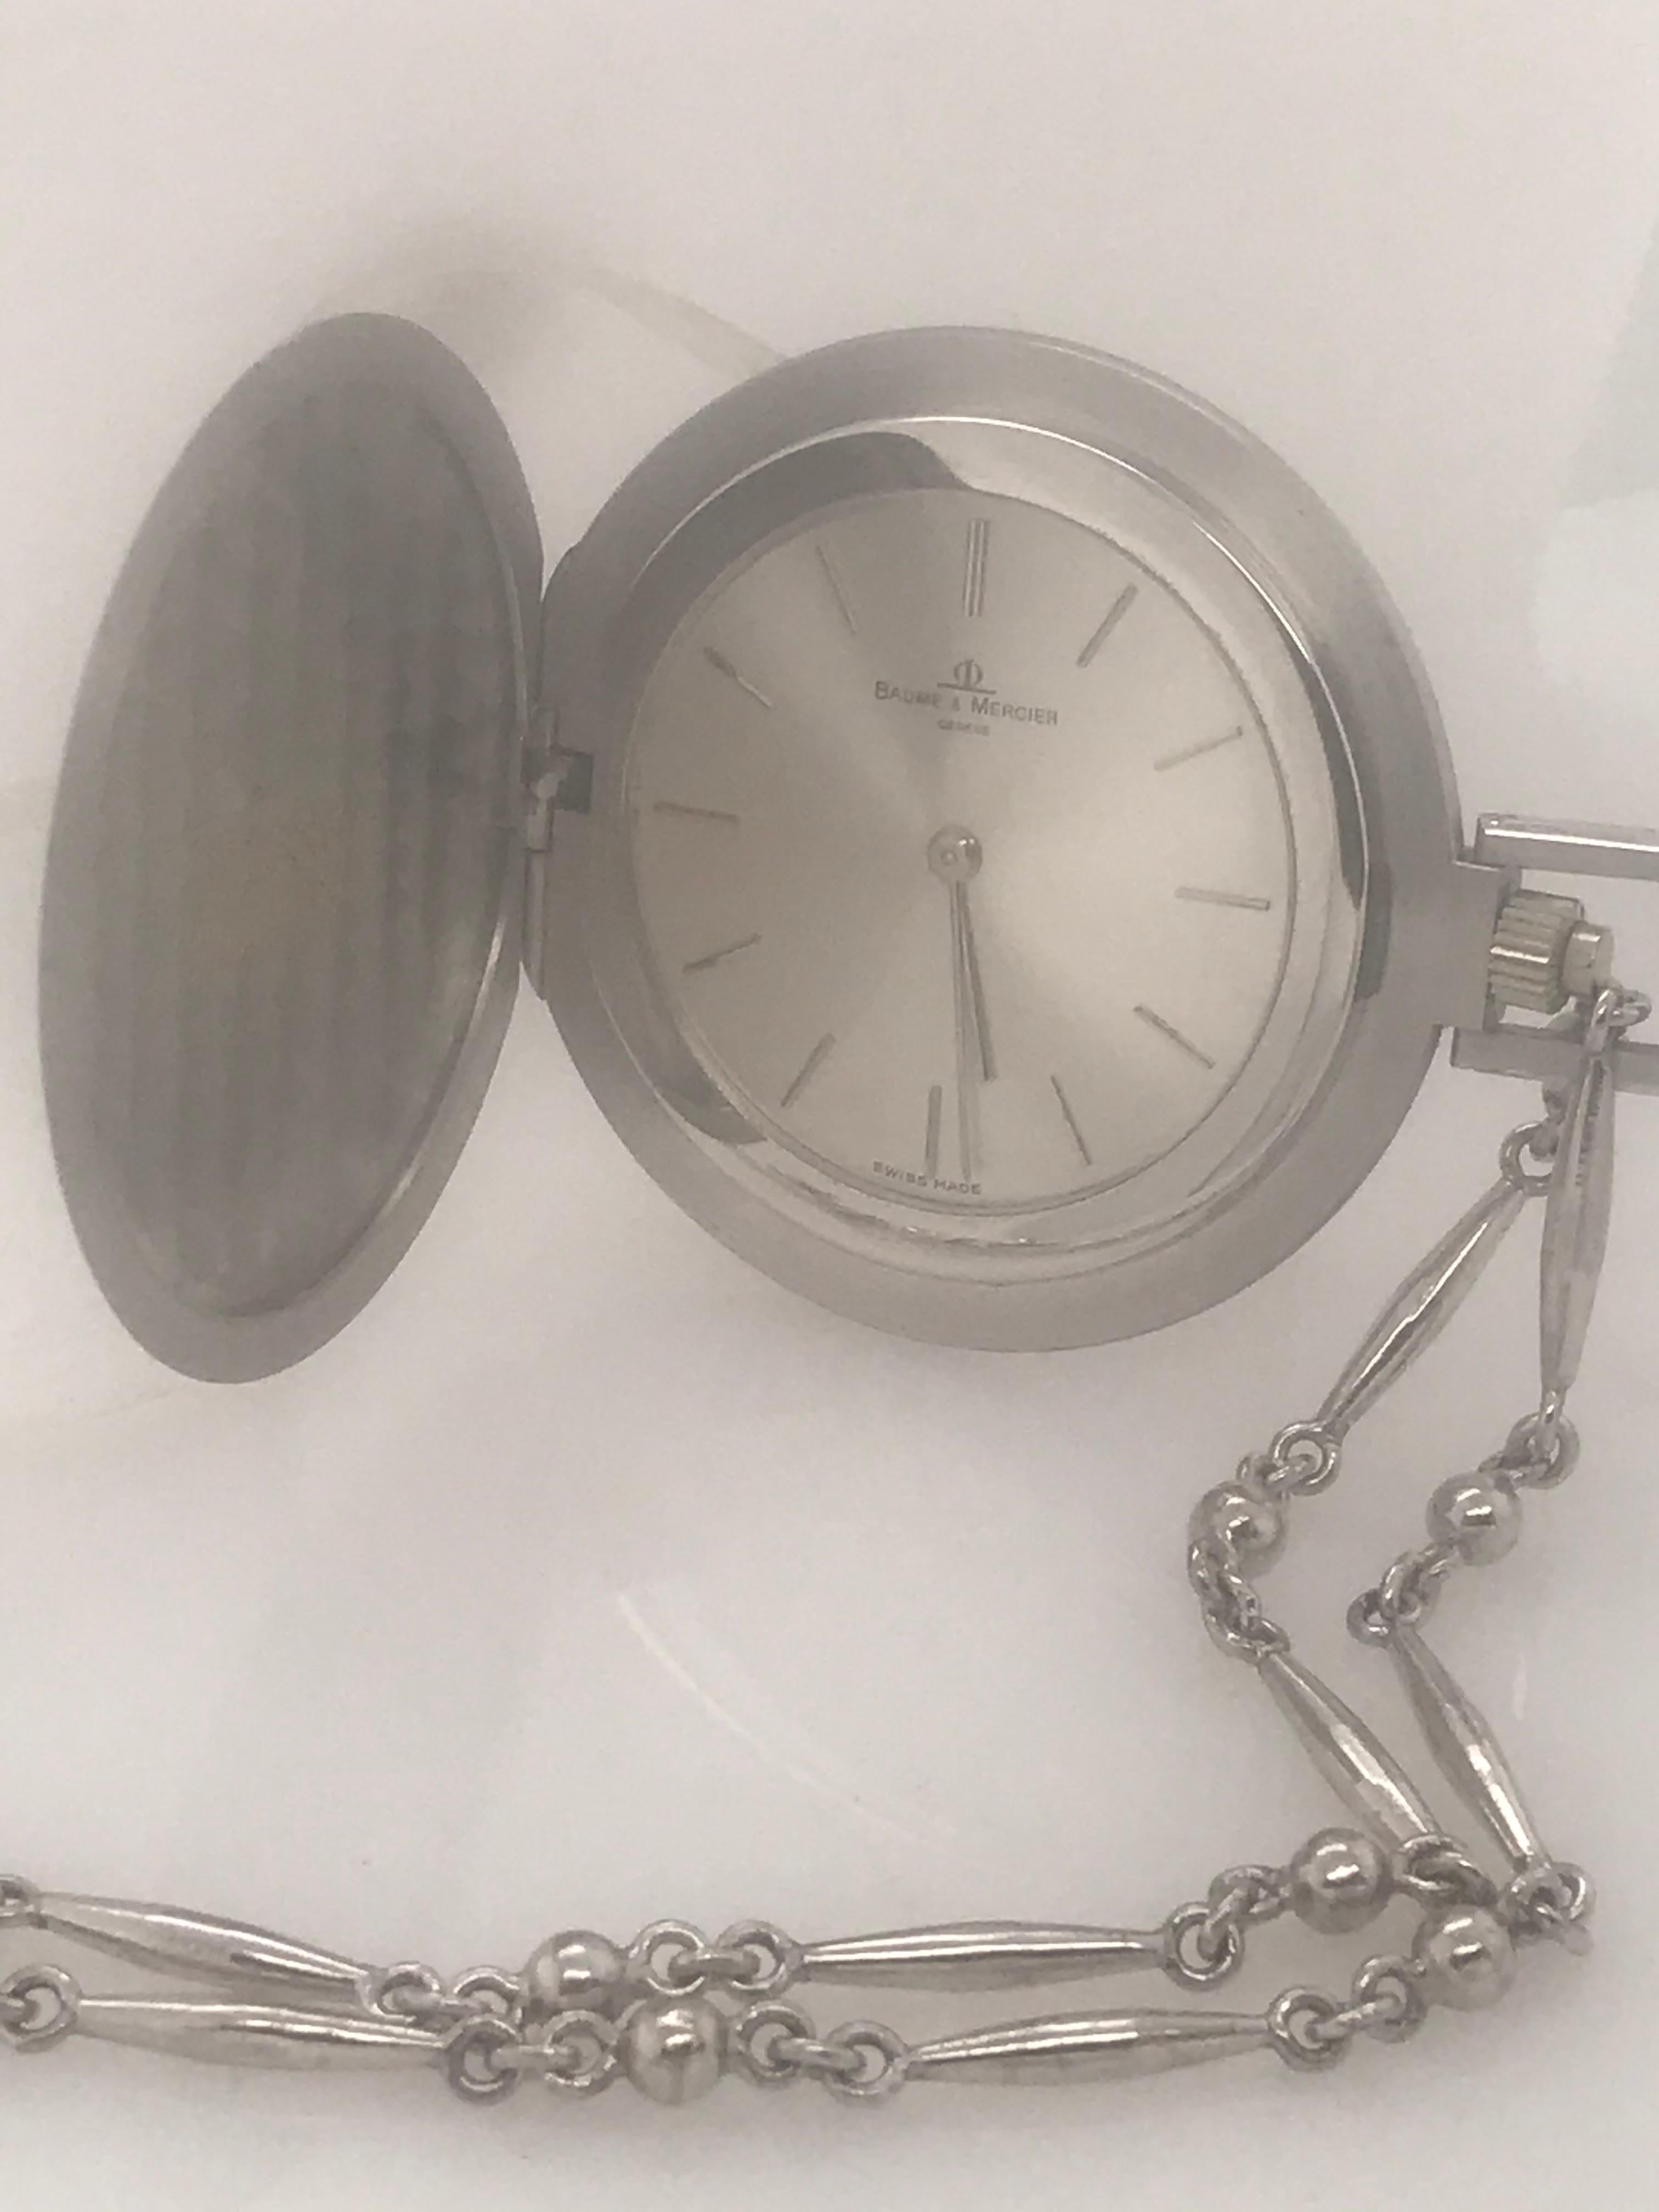 This 18 karat white gold pocket watch has a nice smooth outer edge with a polished bezel on the inside.
A 17